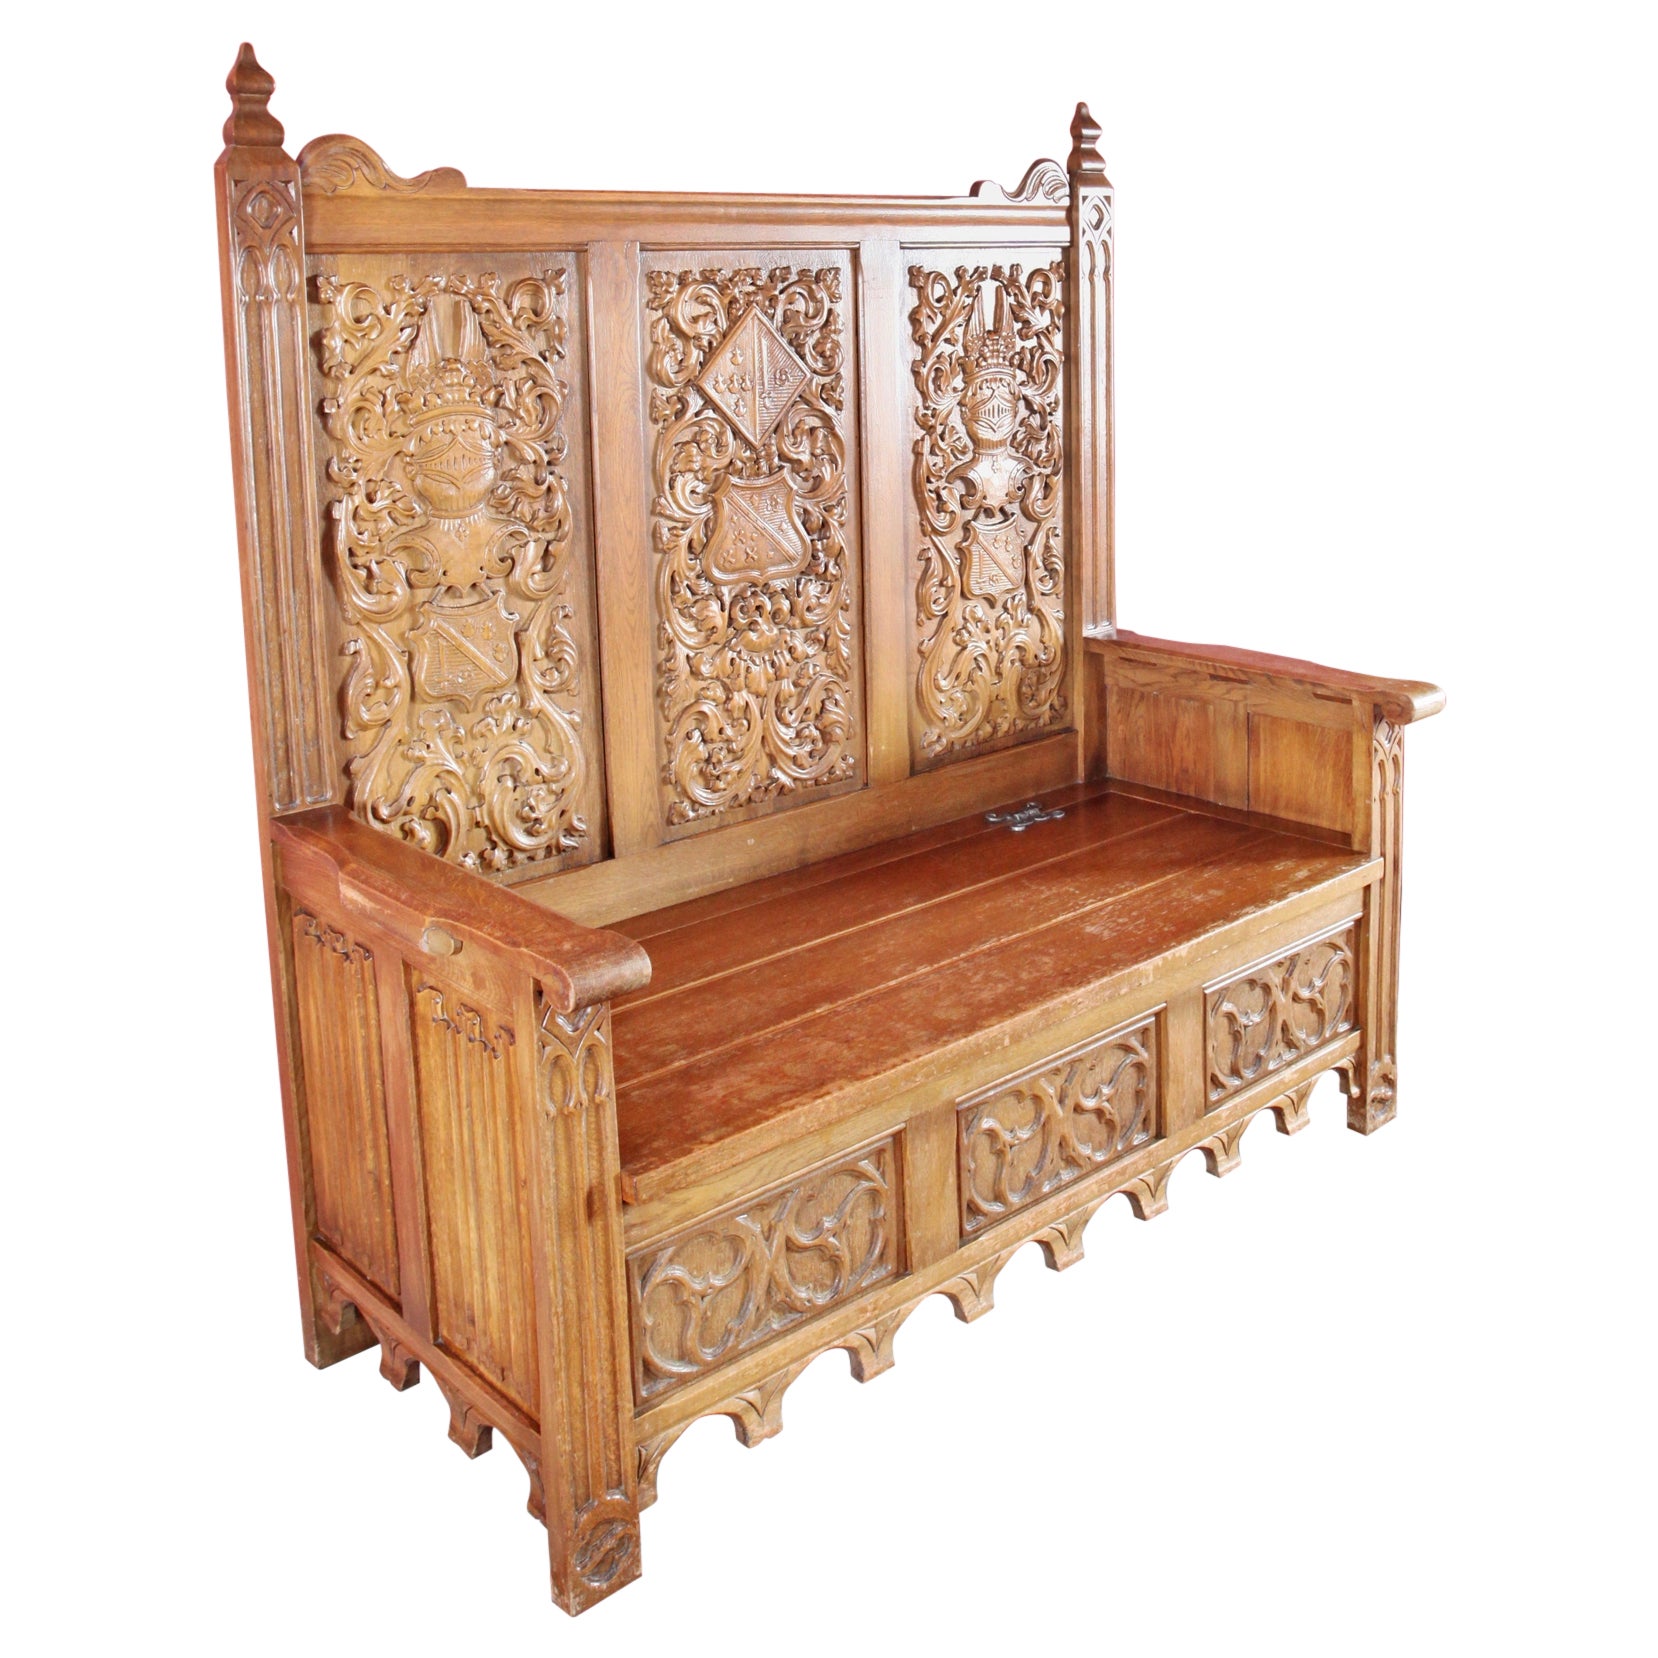 Neo-Gothic oak bench with storage space For Sale